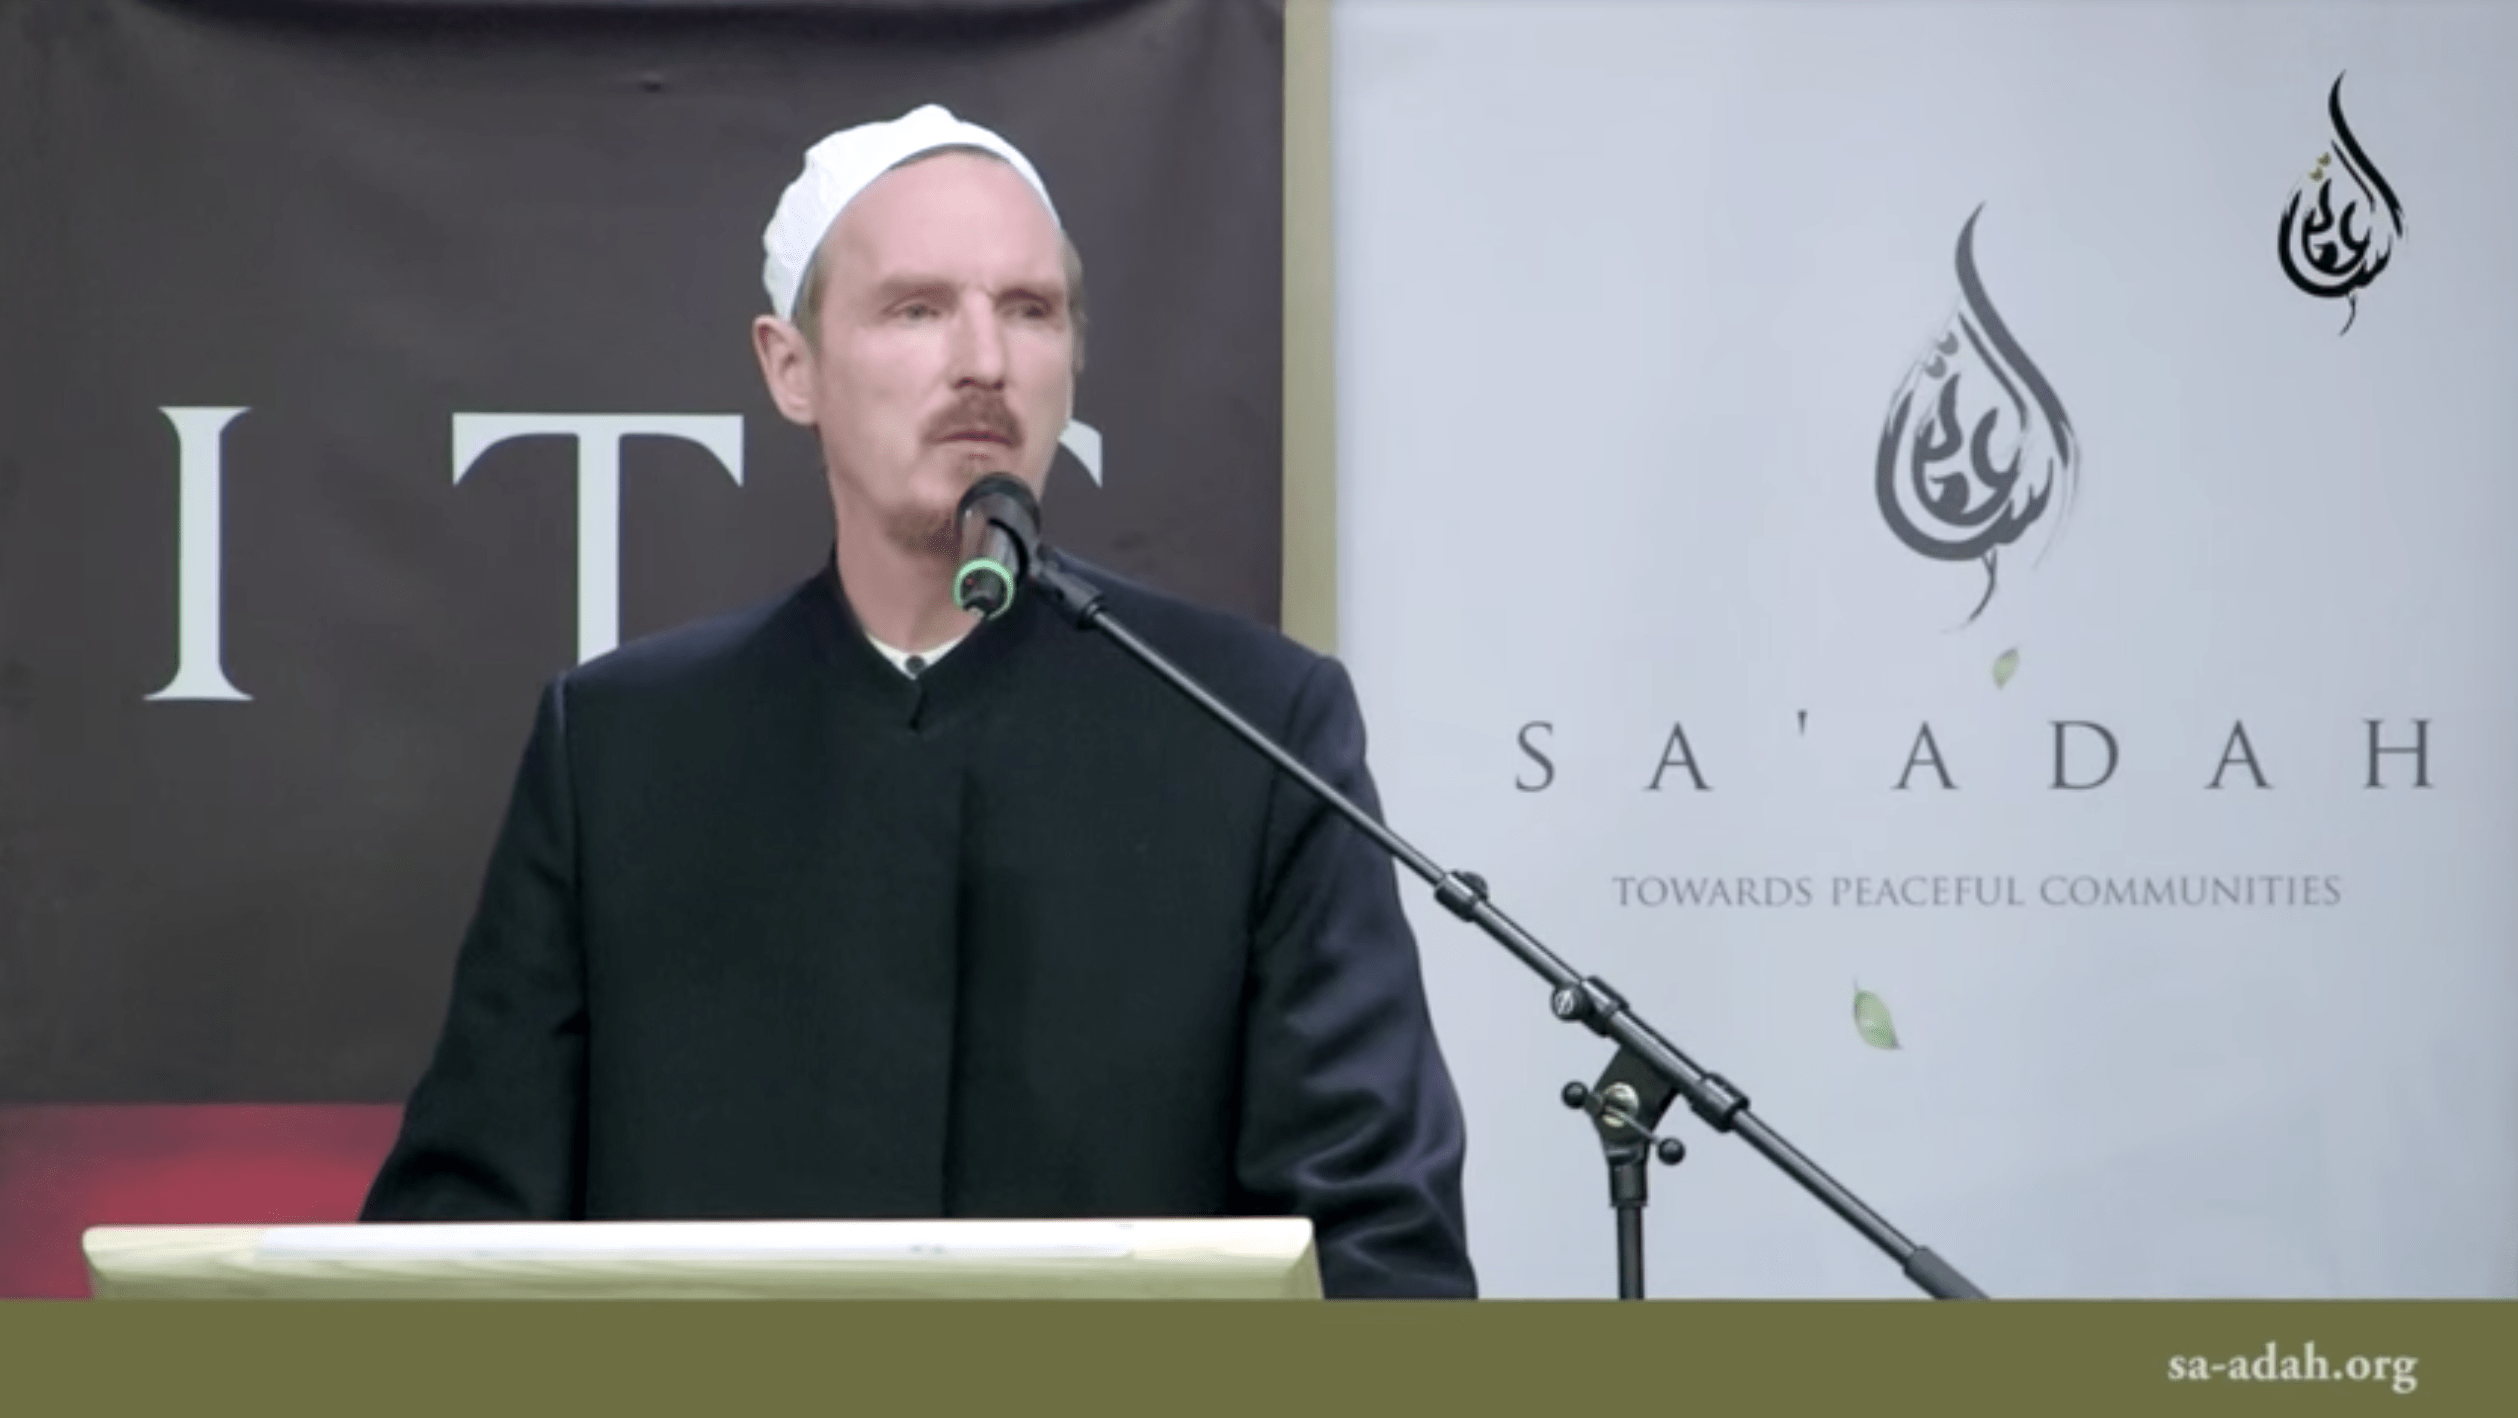 Abdal Hakim Murad – Upholding the Prophetic Character in a Divided World